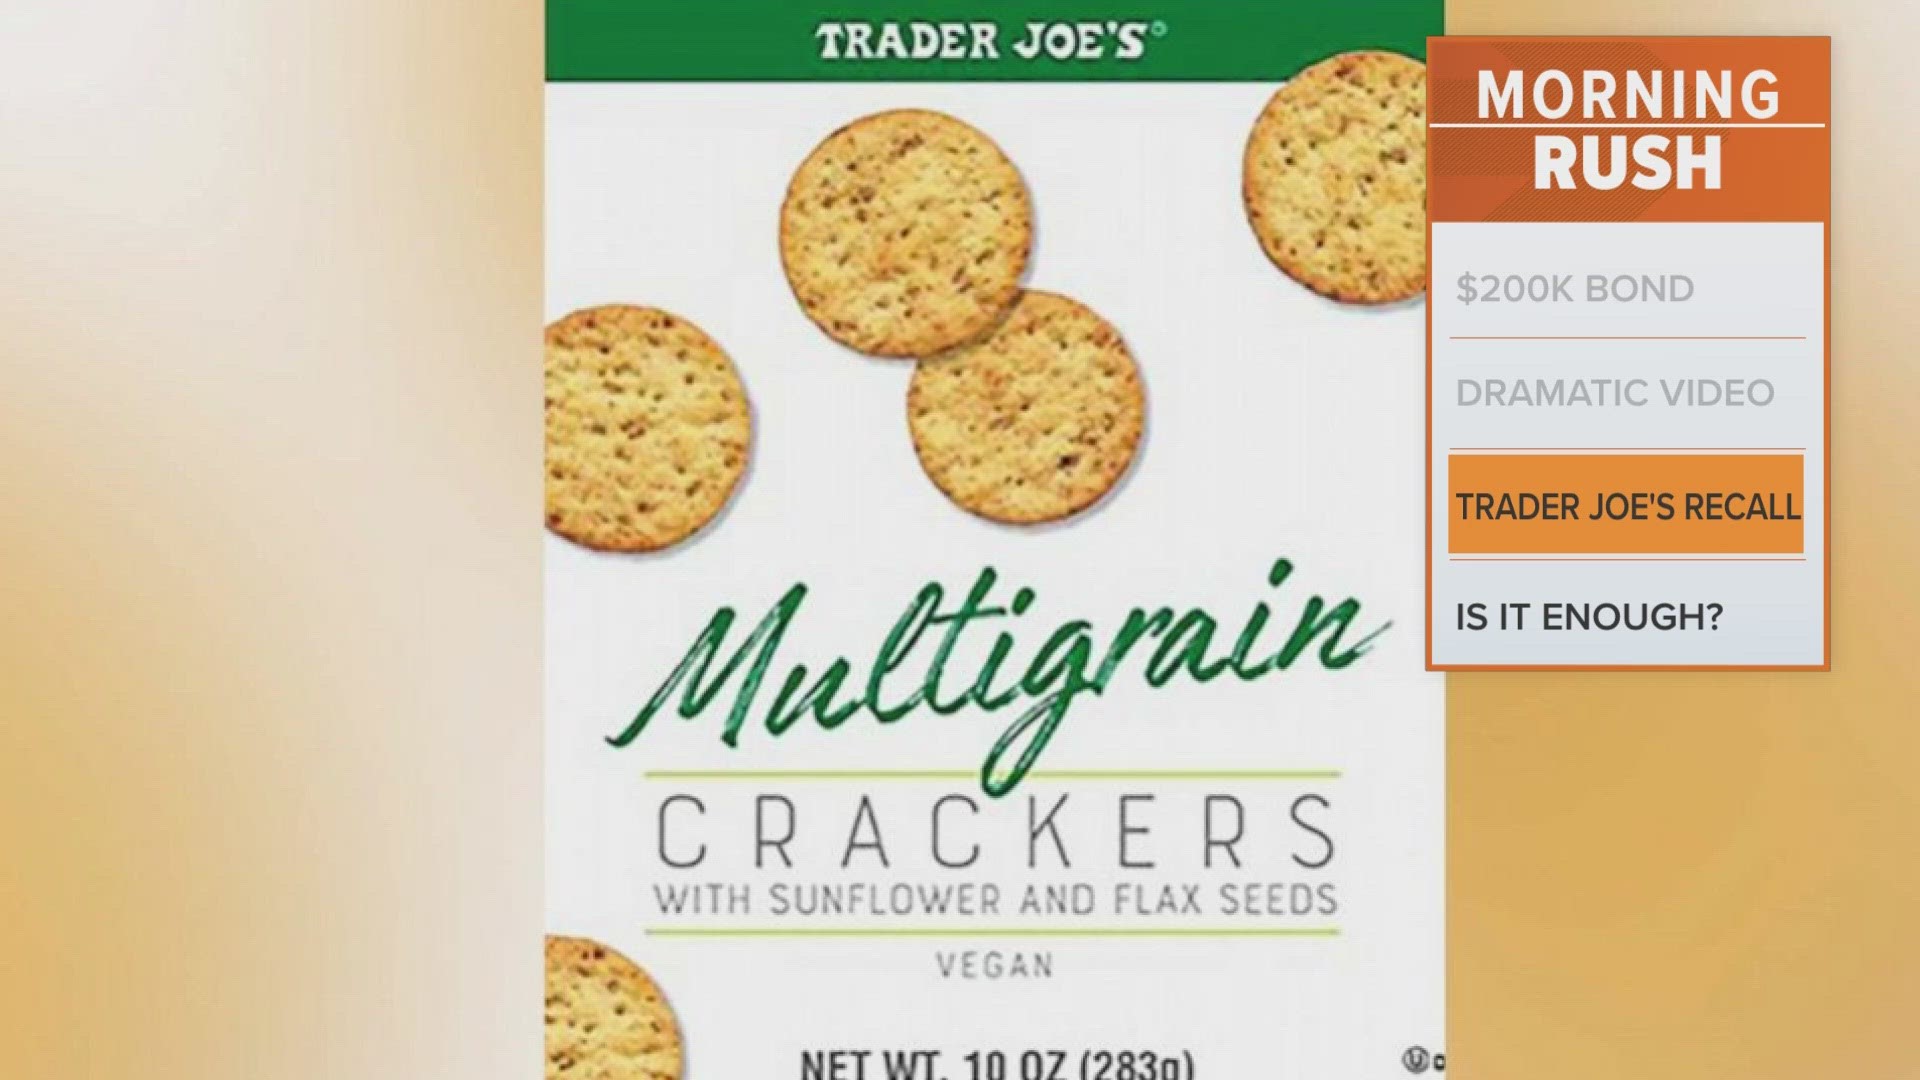 The company's press release says their Multigrain Crackers with Sunflower and Flax Seeds with Best If Used By dates 03/01/24 – 03/05/24 may contain metal.